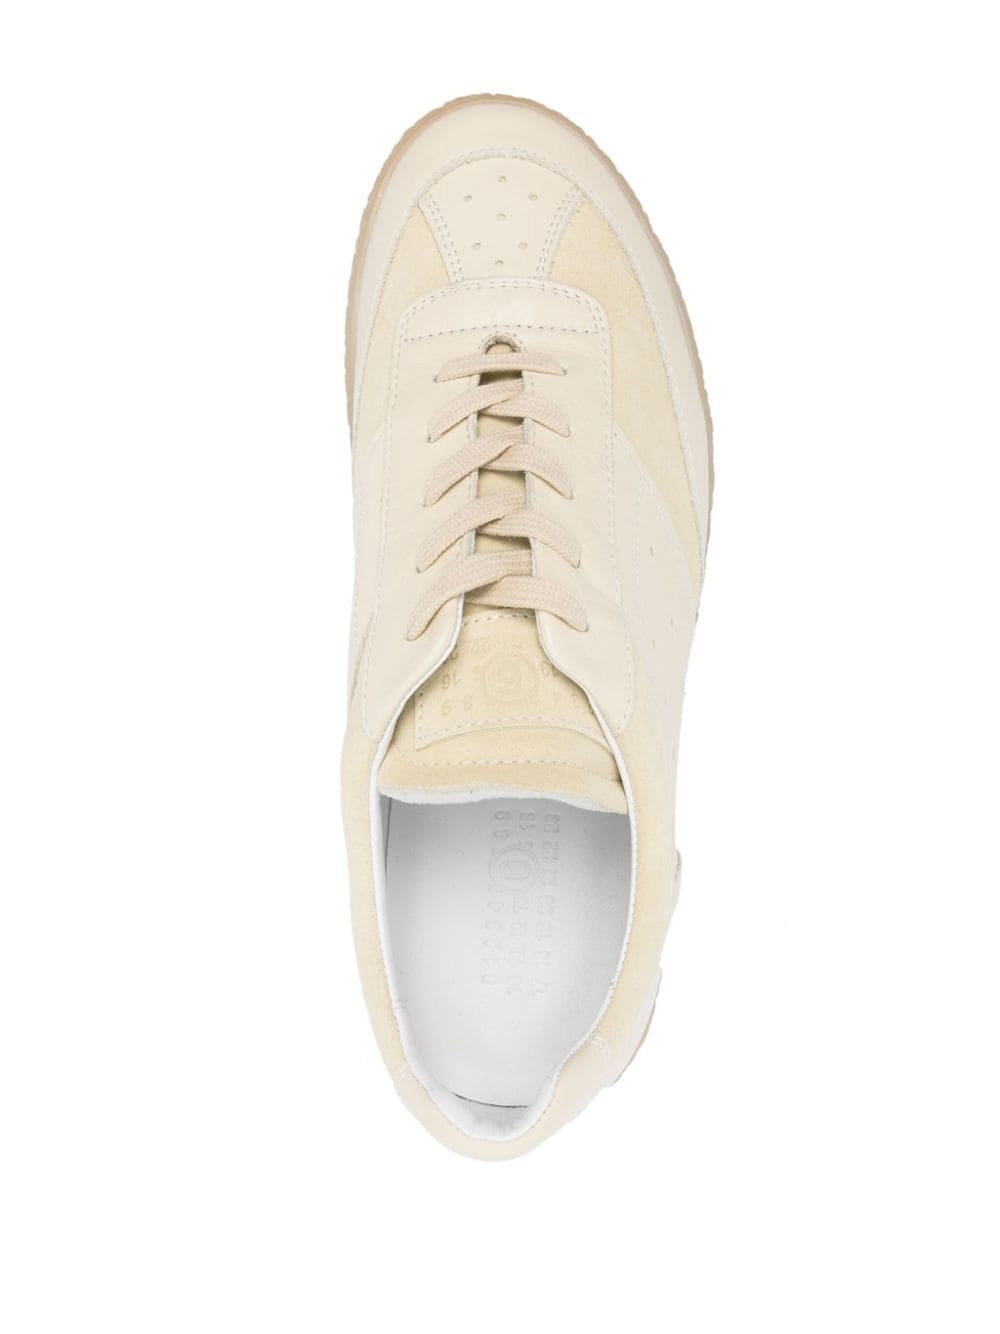 Replica panelled leather sneakers - 4